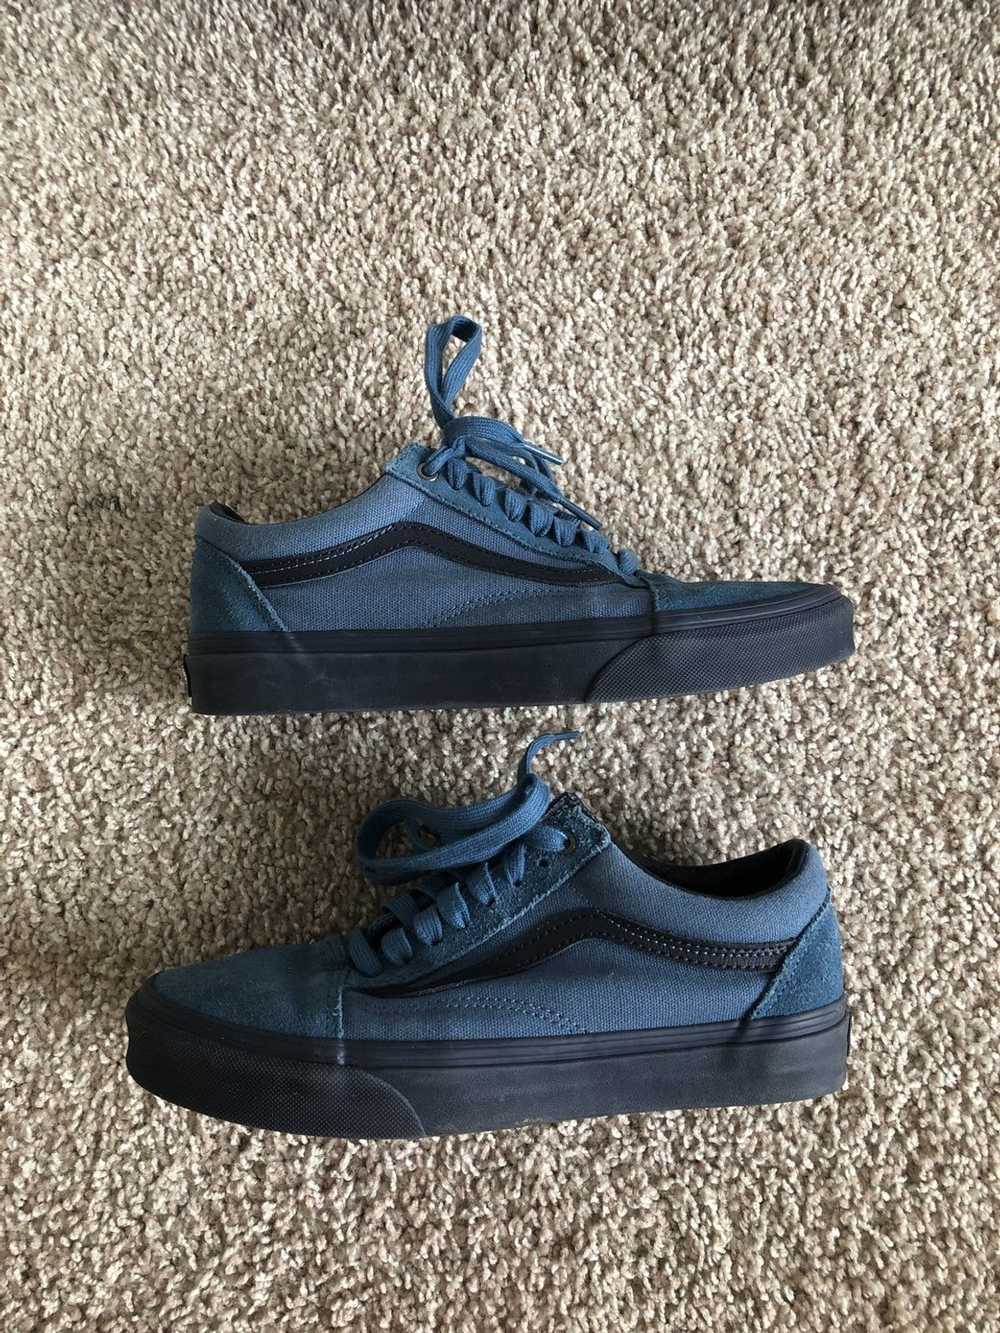 Vans Sk8-Hi Suede Shoes with Popcush Soles, Mens 9.0 - clothing &  accessories - by owner - apparel sale - craigslist